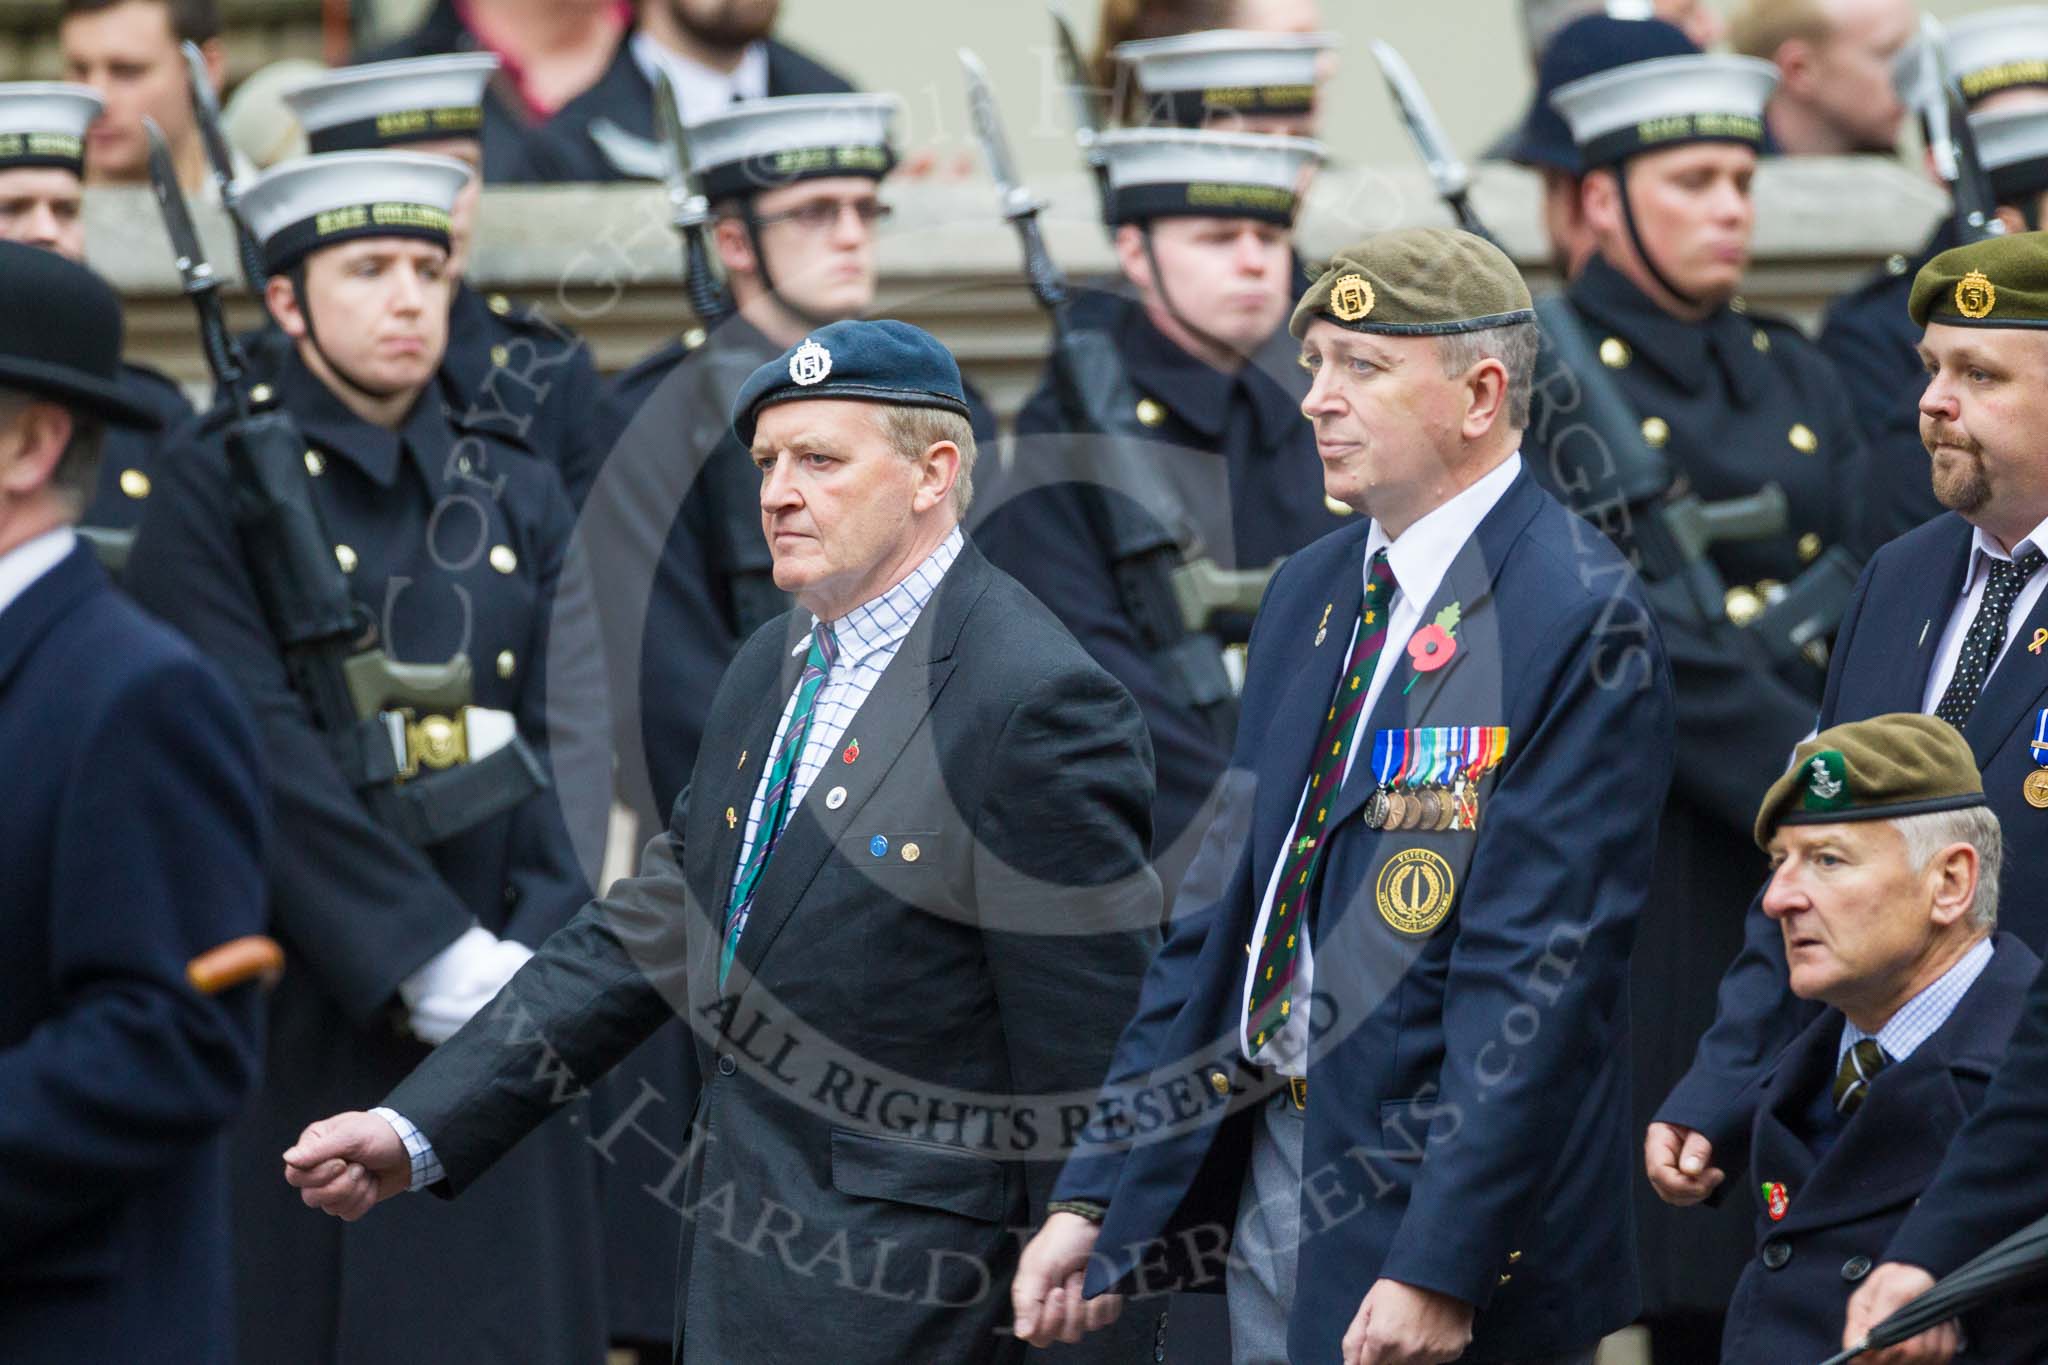 Remembrance Sunday at the Cenotaph 2015: Group A22, Green Howards Association.
Cenotaph, Whitehall, London SW1,
London,
Greater London,
United Kingdom,
on 08 November 2015 at 12:12, image #1343